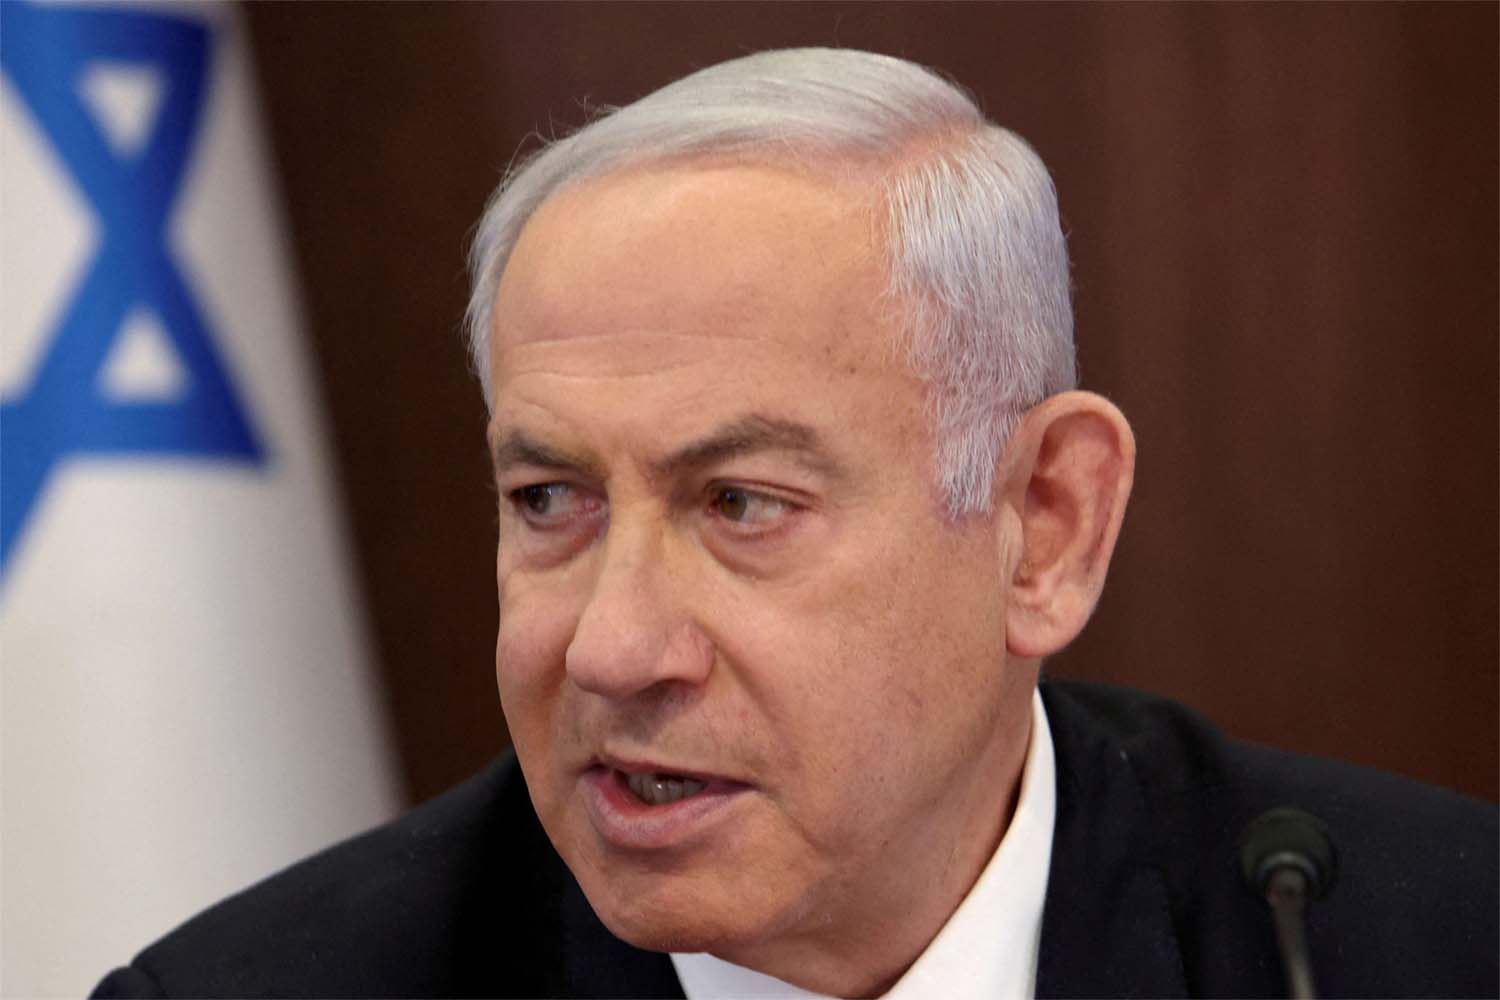 Netanyahu will be in Italy for a three-day visit